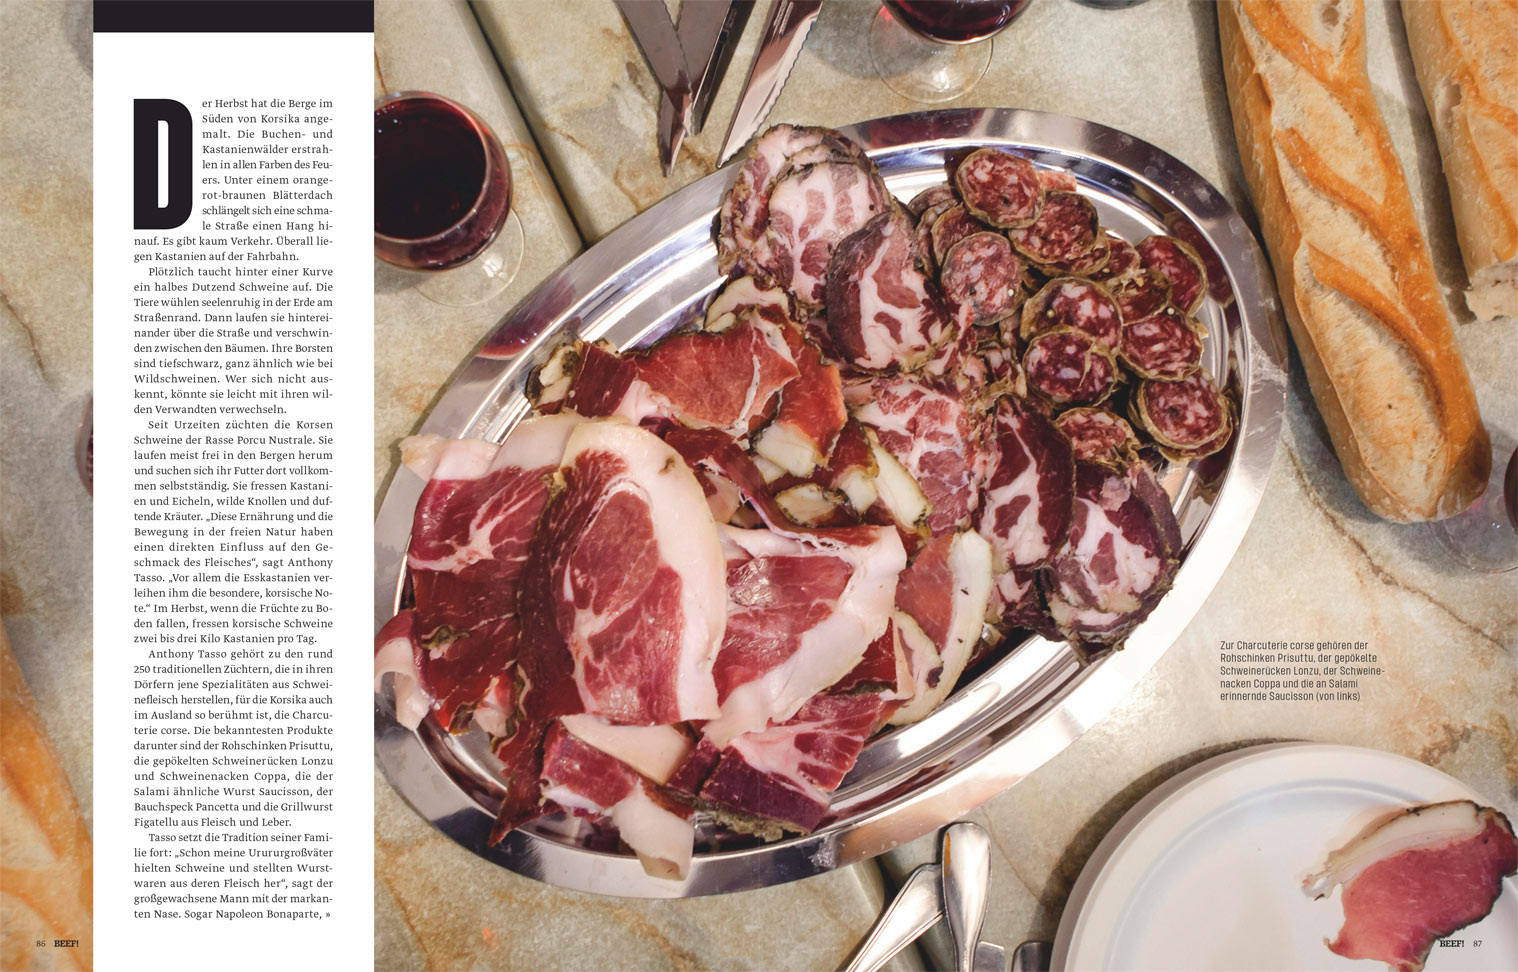 Double-page spread inside BEEF! magazine, showing a full-bleed photo of a plate of dried meat